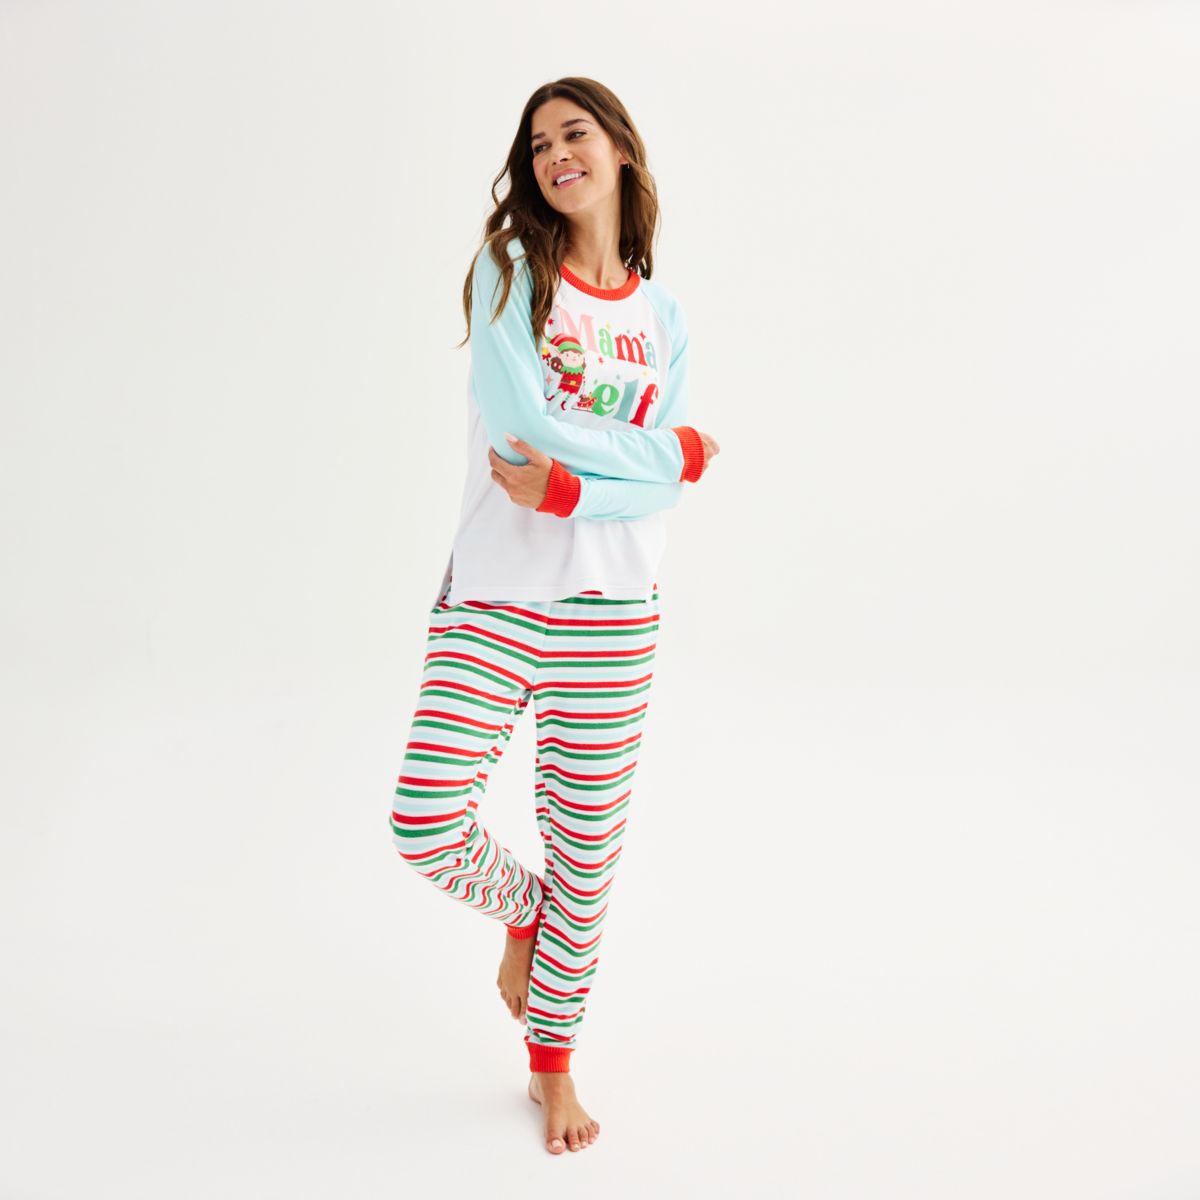 Women's Jammies For Your Families® Sweater Knit Mama Elf Top & Bottoms Pajama Set by Cuddl Duds® Cuddl Duds